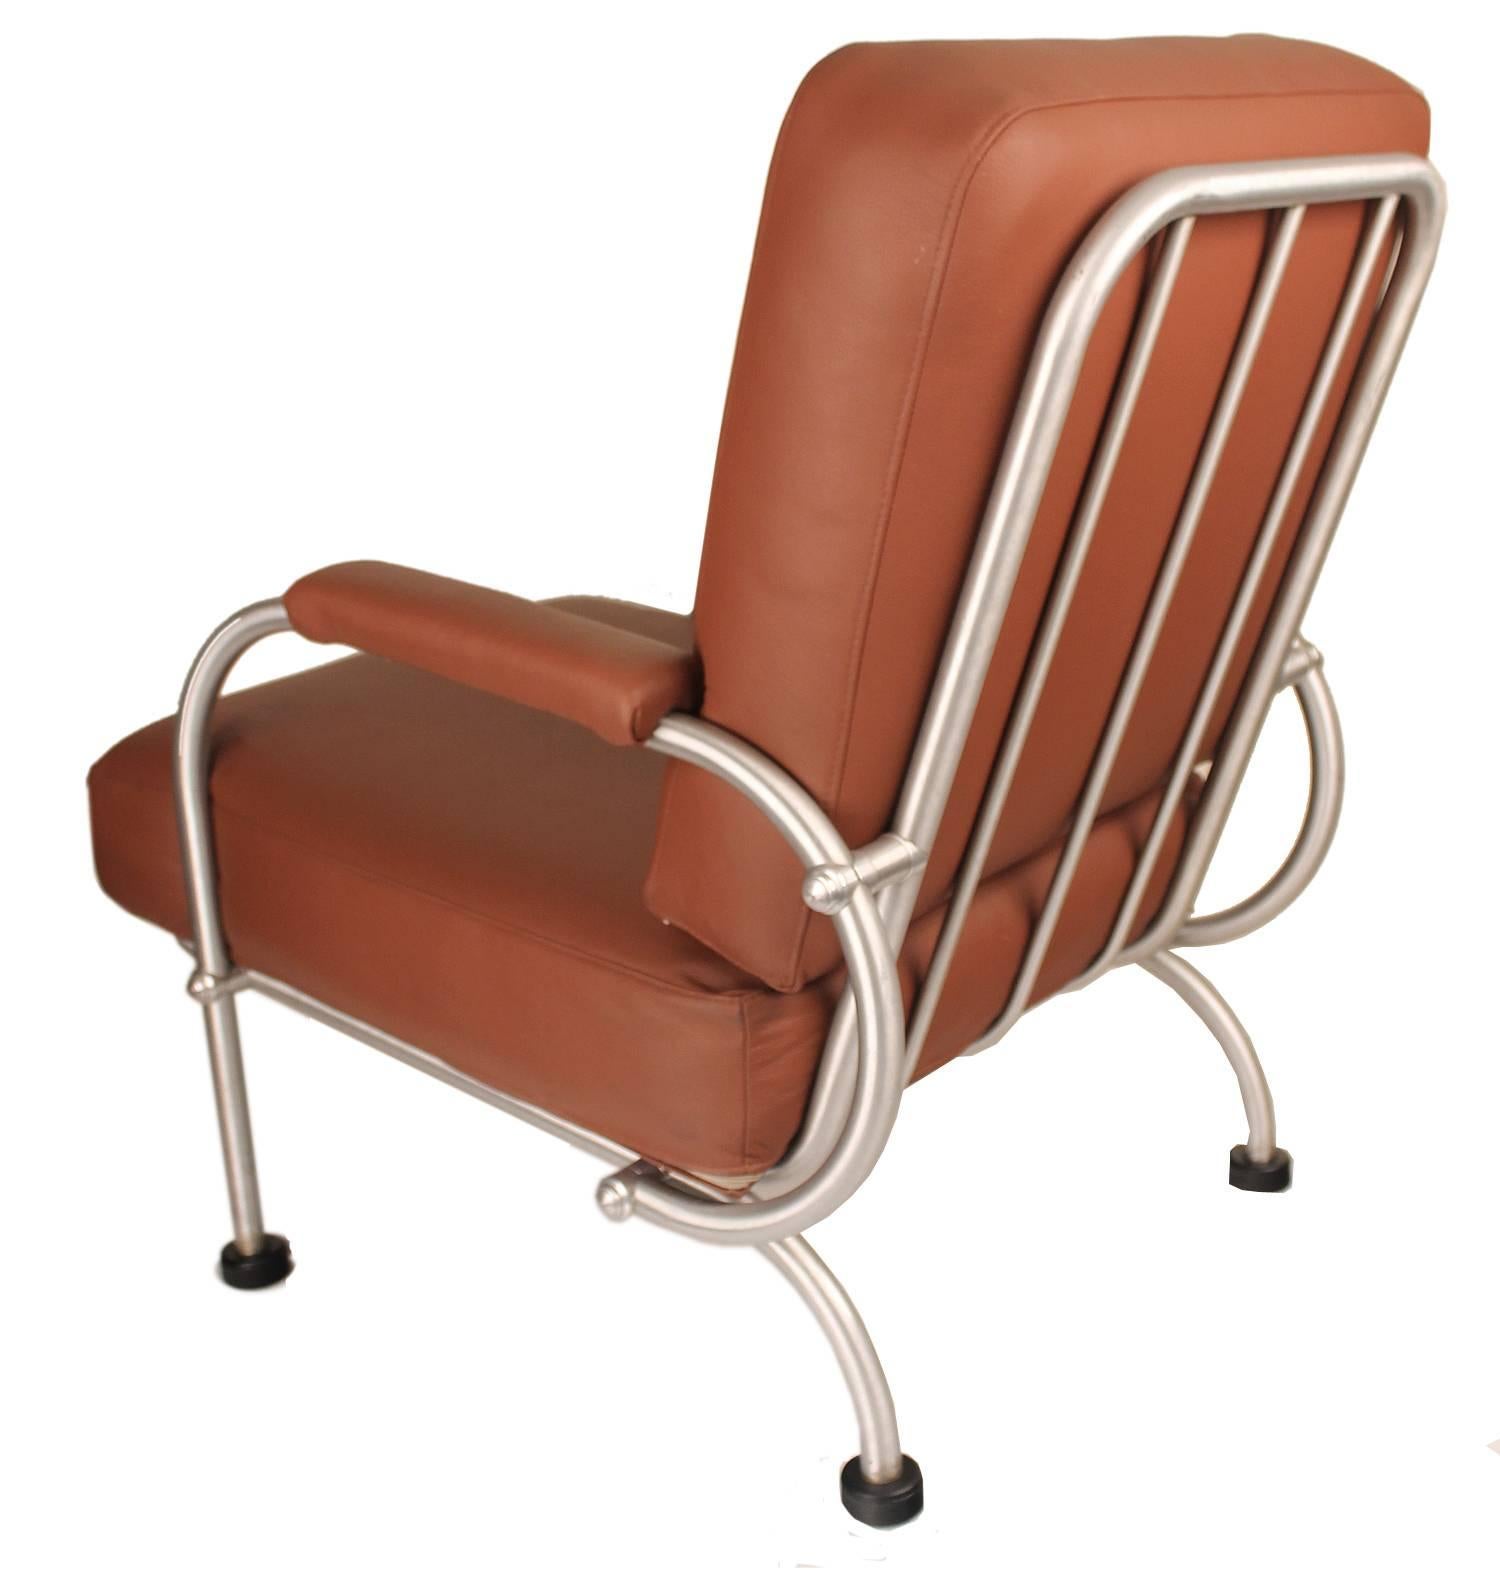 Mid-20th Century  Pair of 1930s Art Deco Warren McArthur Lounge Chairs For Sale